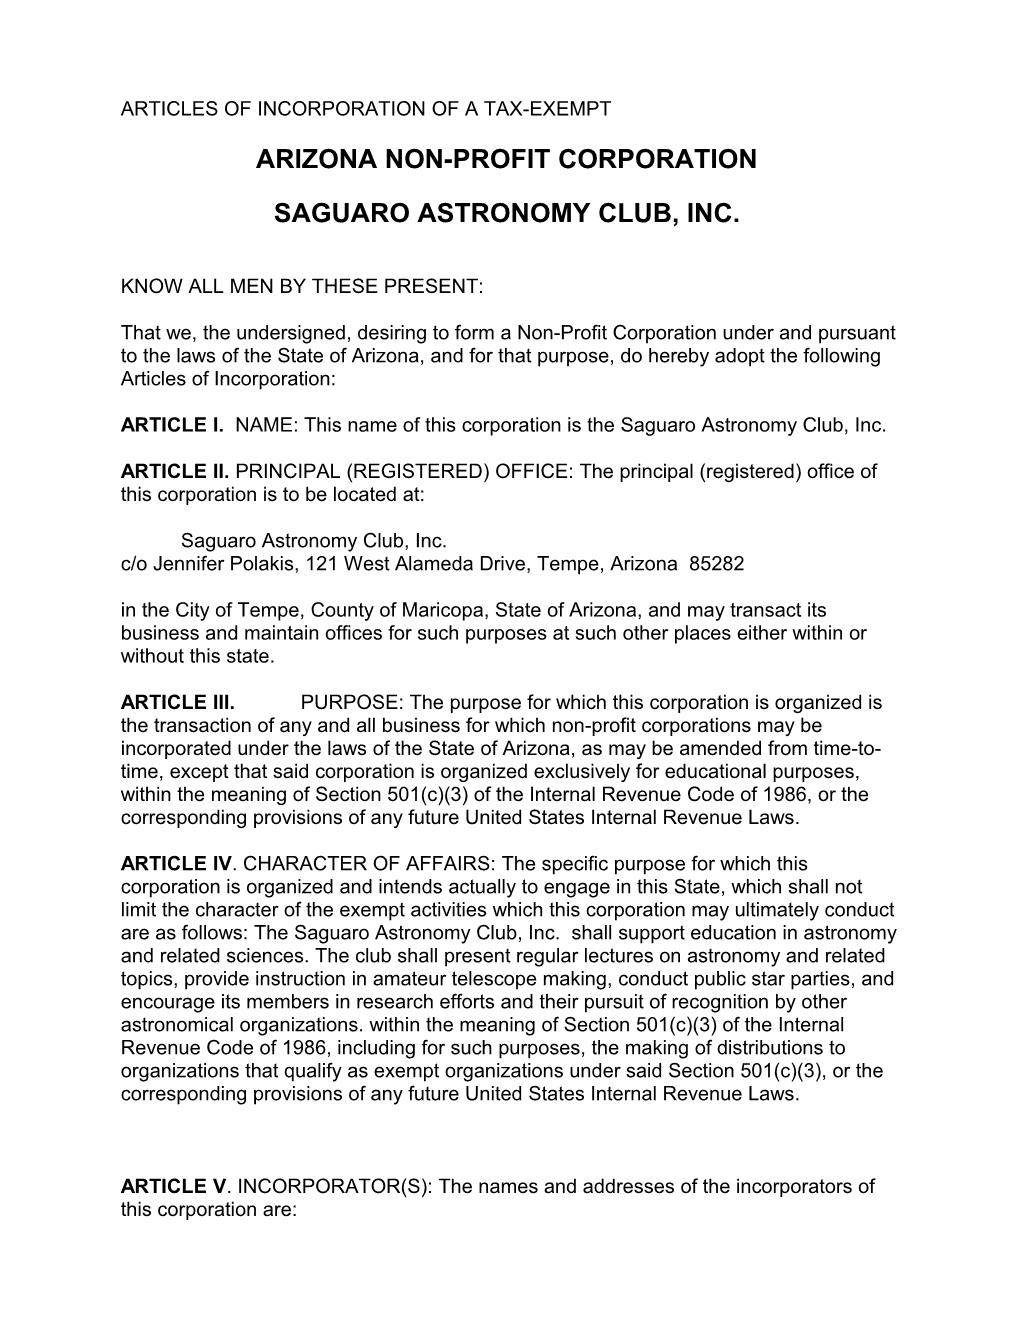 CONSTITUTION of the Huachuca Astronomy Club